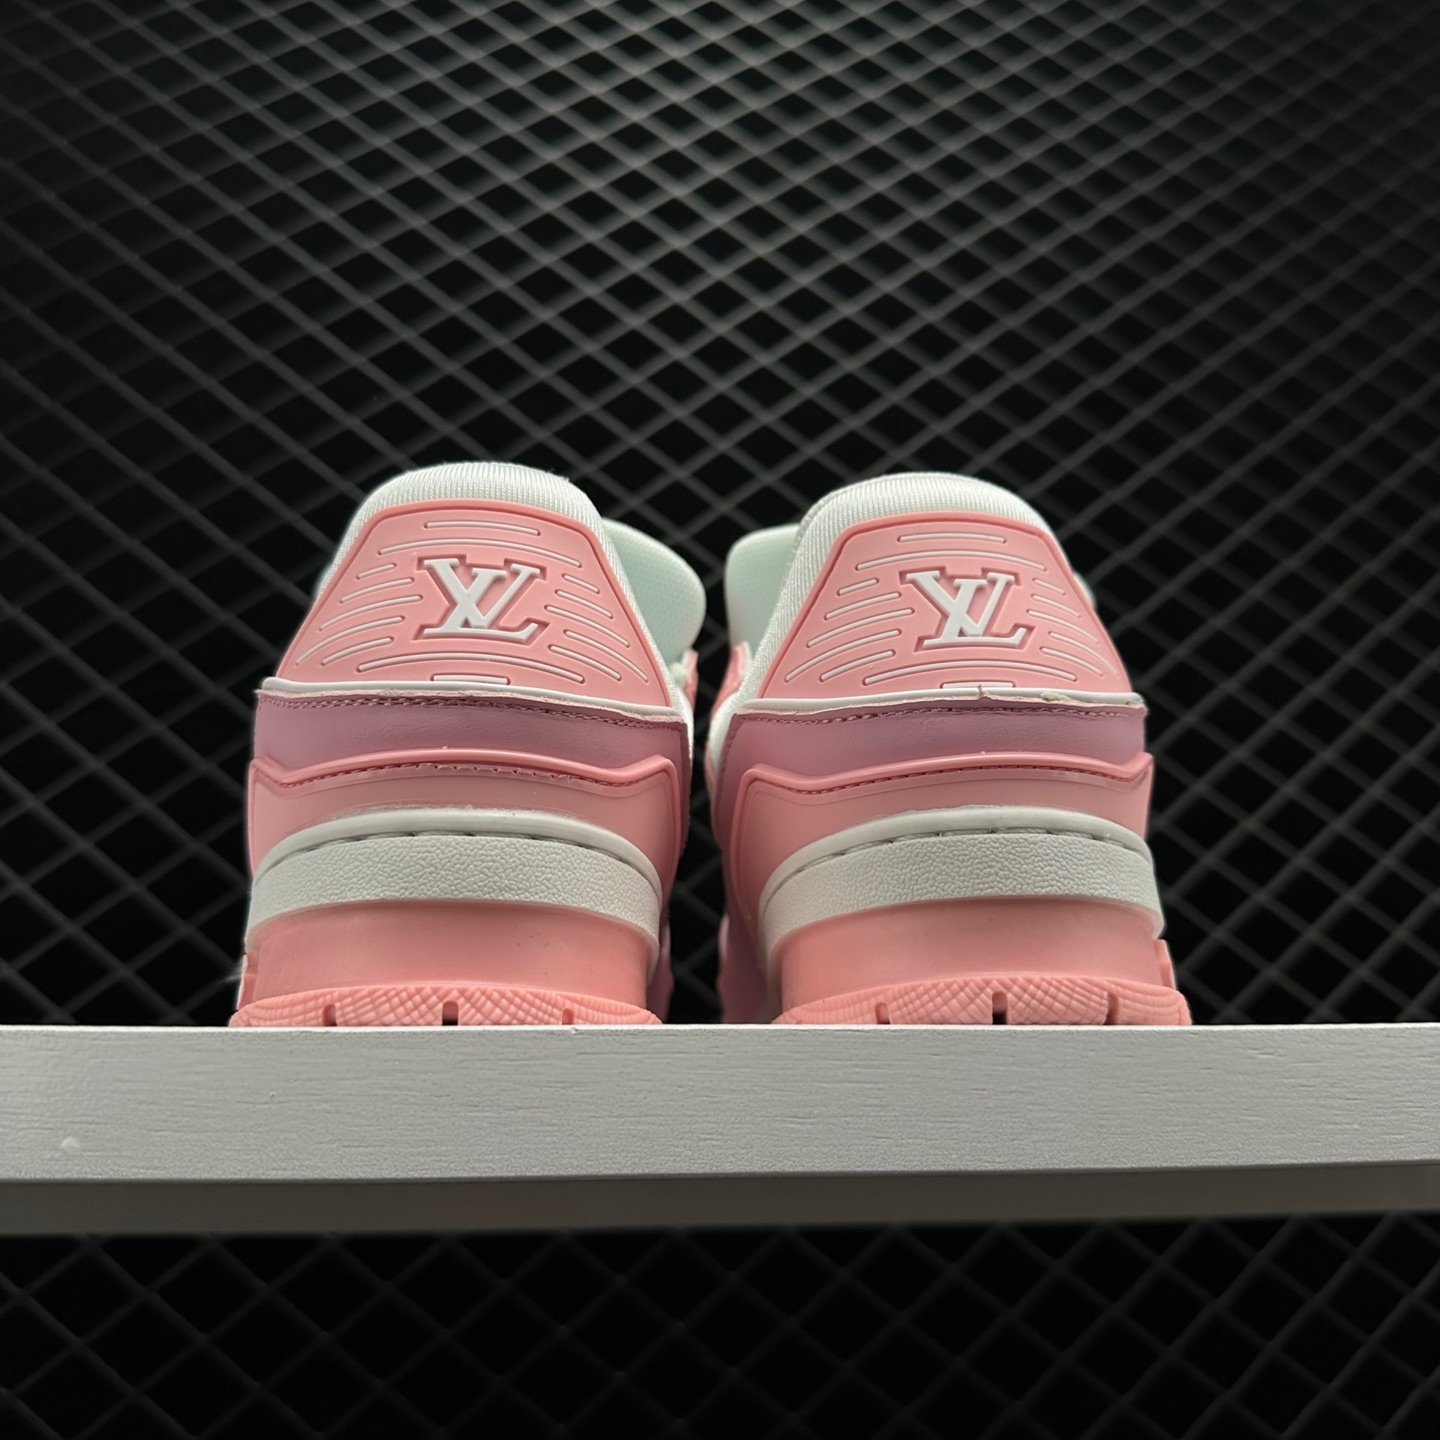 Shop the Exquisite Louis Vuitton Trainer Pink Rose 1AA6VV for Glamorous Style